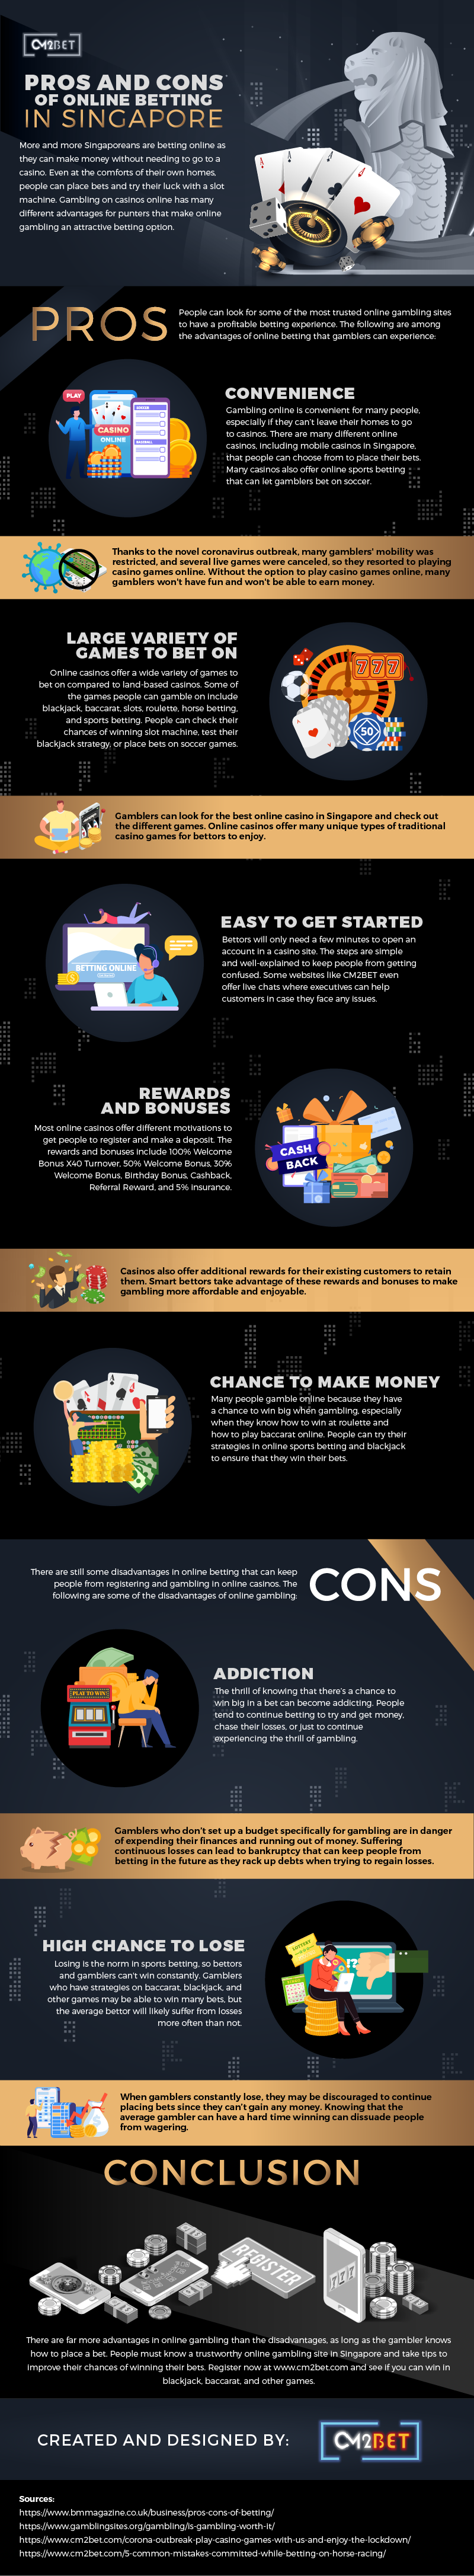 Pros and Cons of Online Betting in Singapore - Infographic